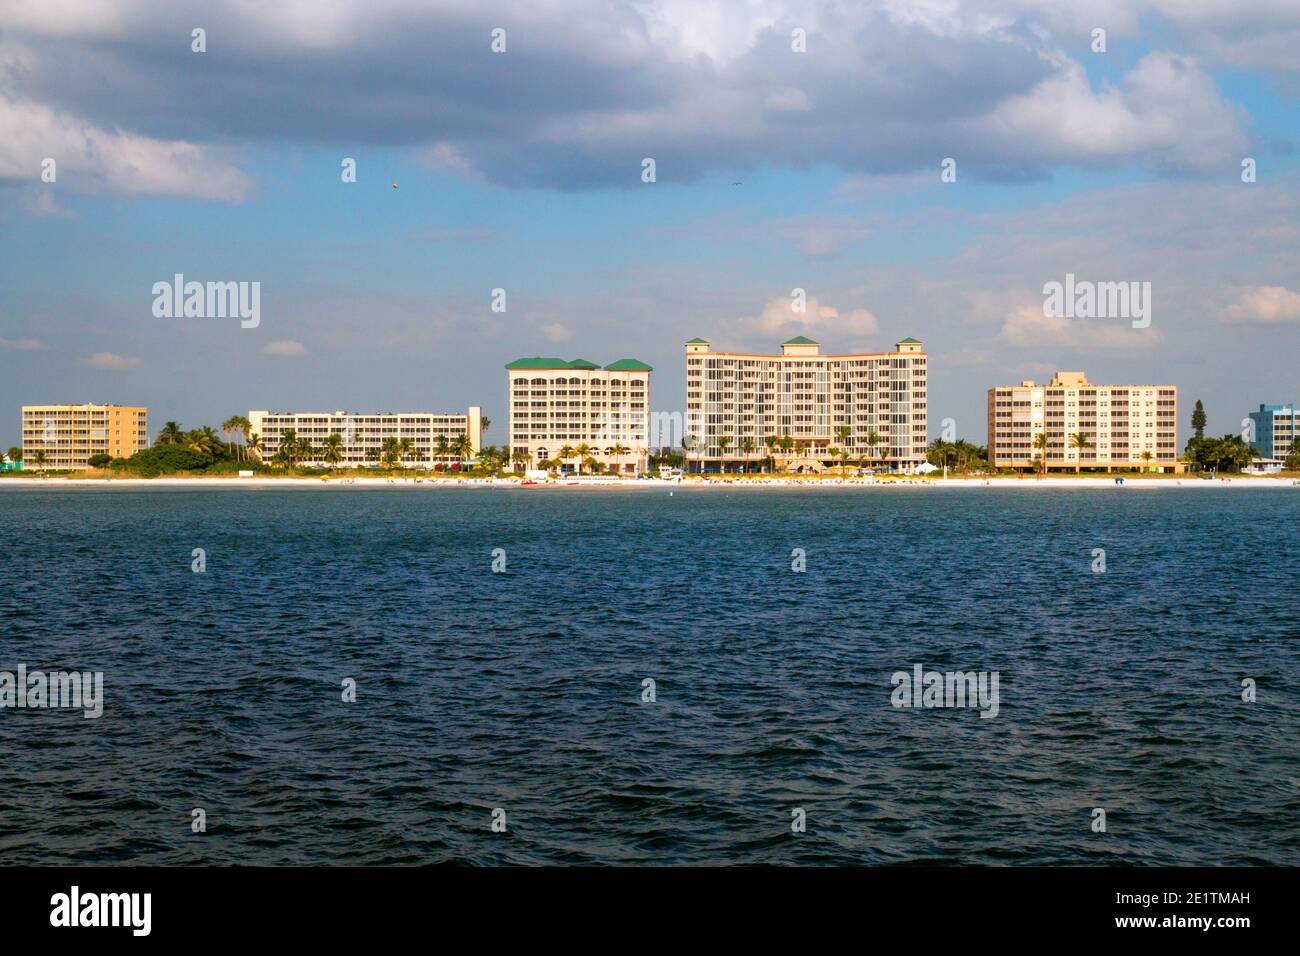 Fort Myers beach Florida holiday vacation destination, coast of Estero Island with beachfront hotel resort buildings, view from the boat Stock Photo